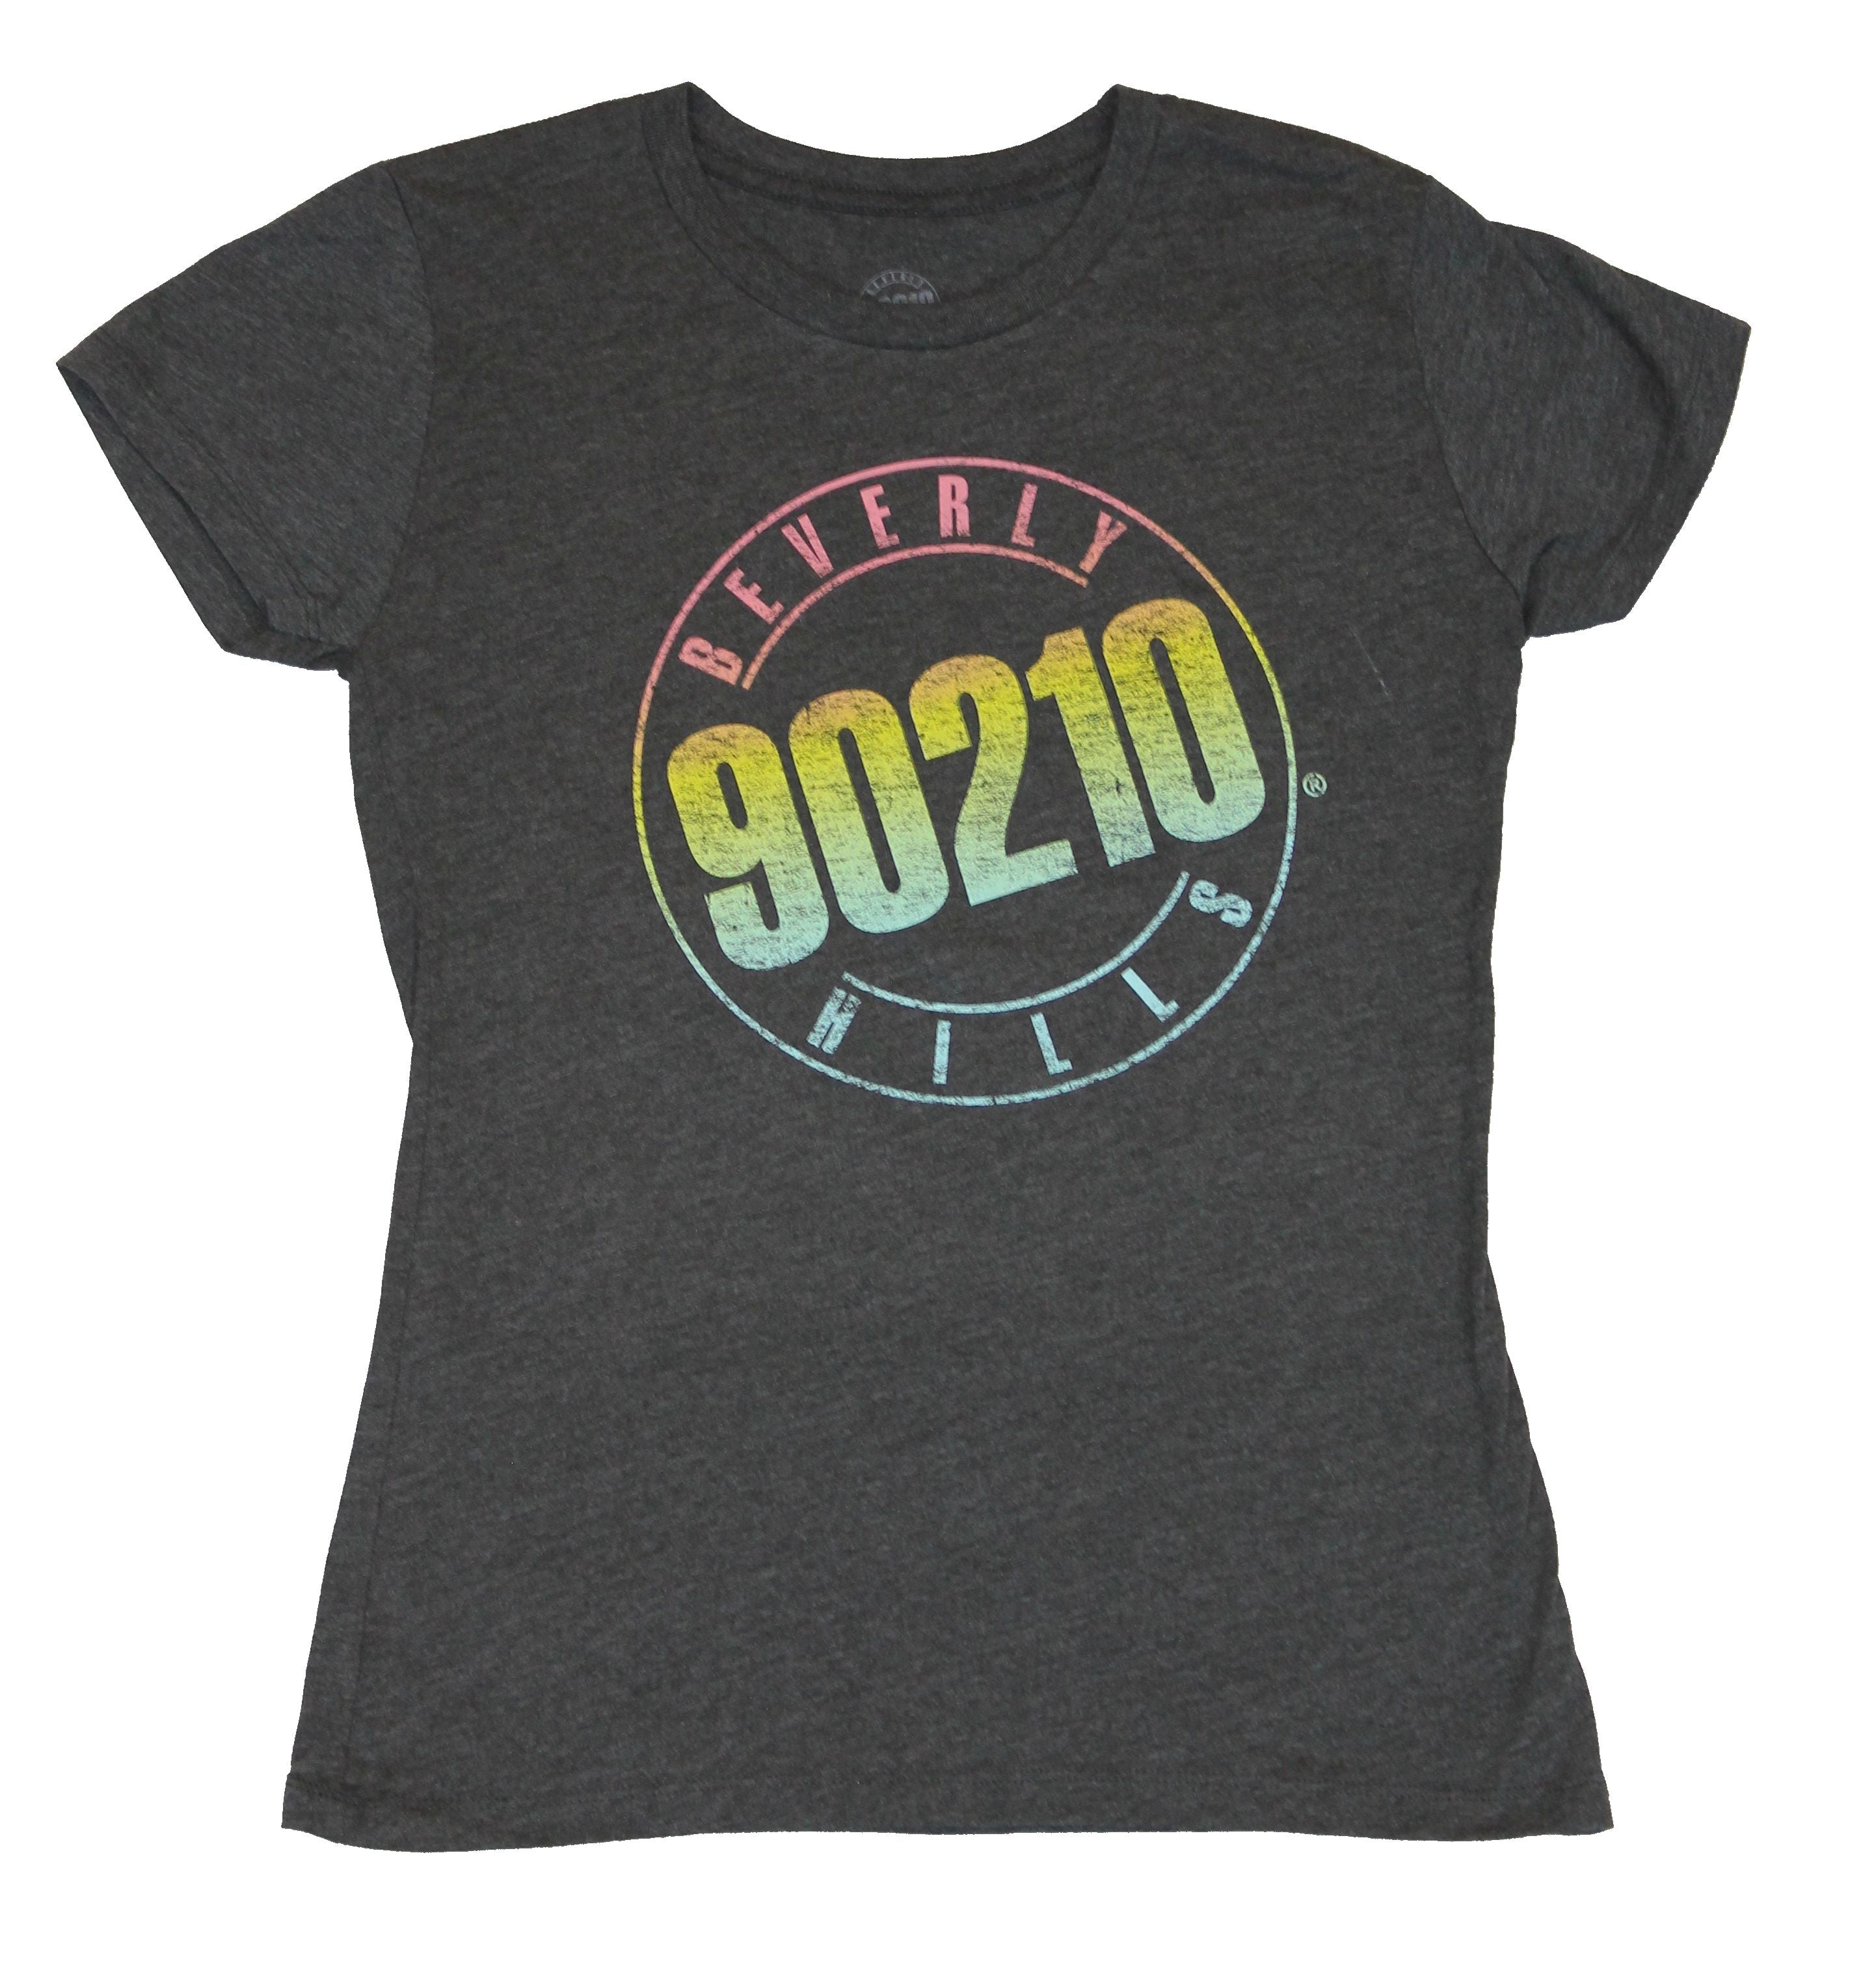 Beverly Hills 90210 Girls (Juniors) T-Shirt - Classic Colorful Distressed Logo